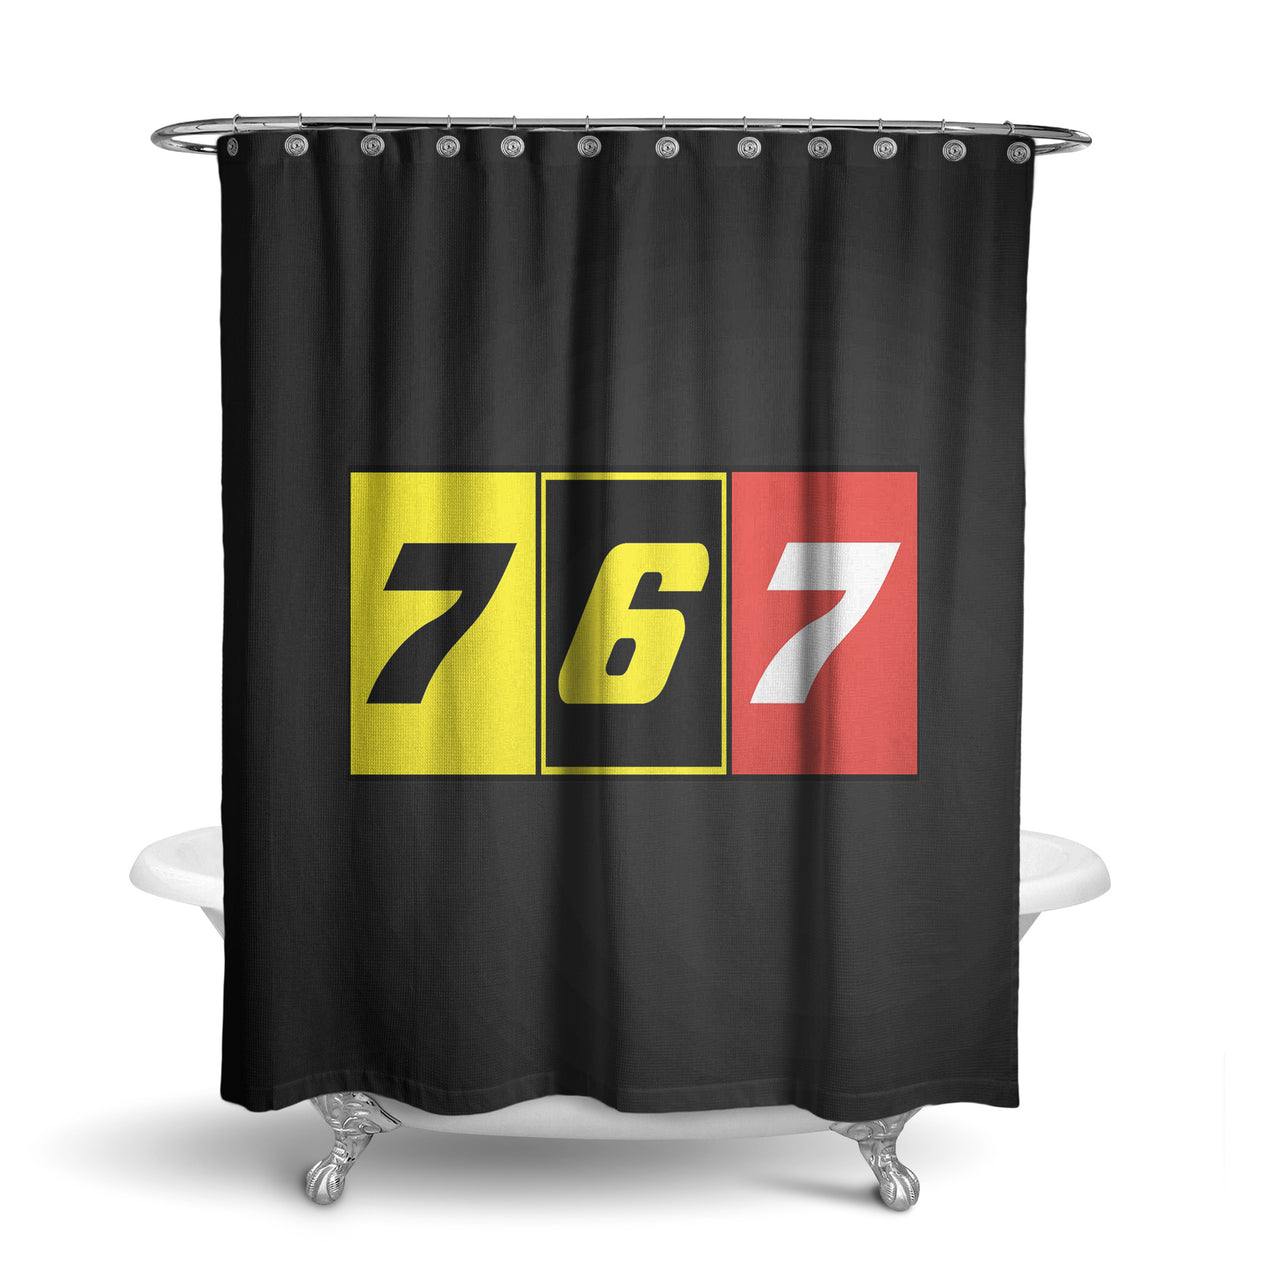 Flat Colourful 767 Designed Shower Curtains